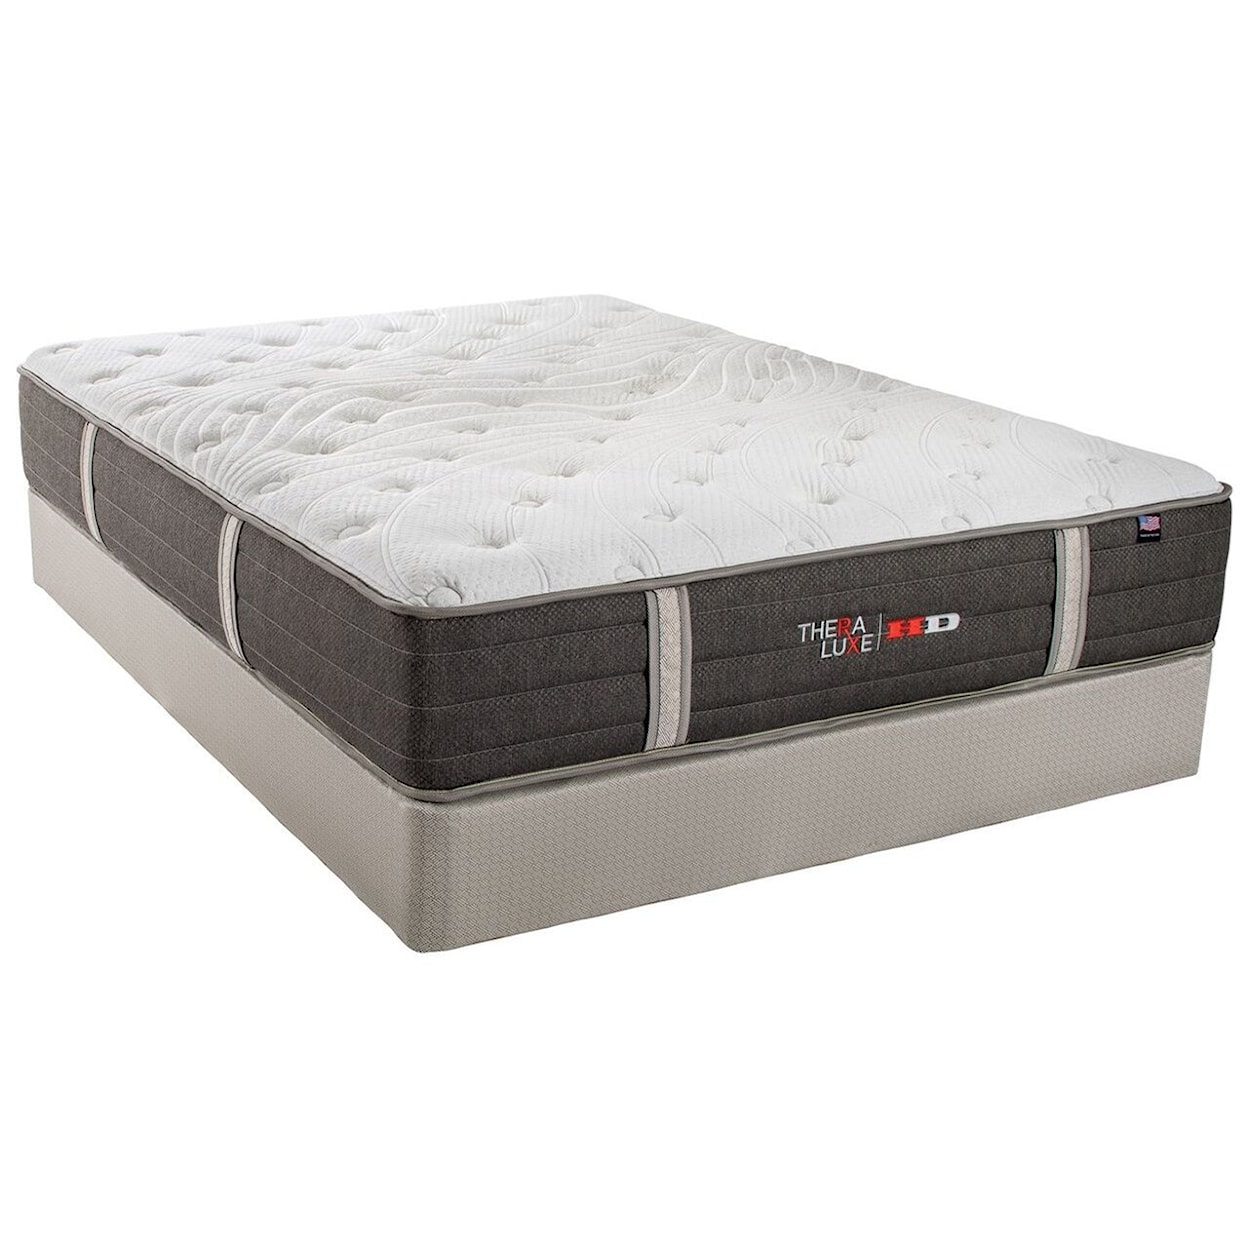 Therapedic Thera Luxe HD Balsam Queen Firm Pocketed Coil Mattress Set